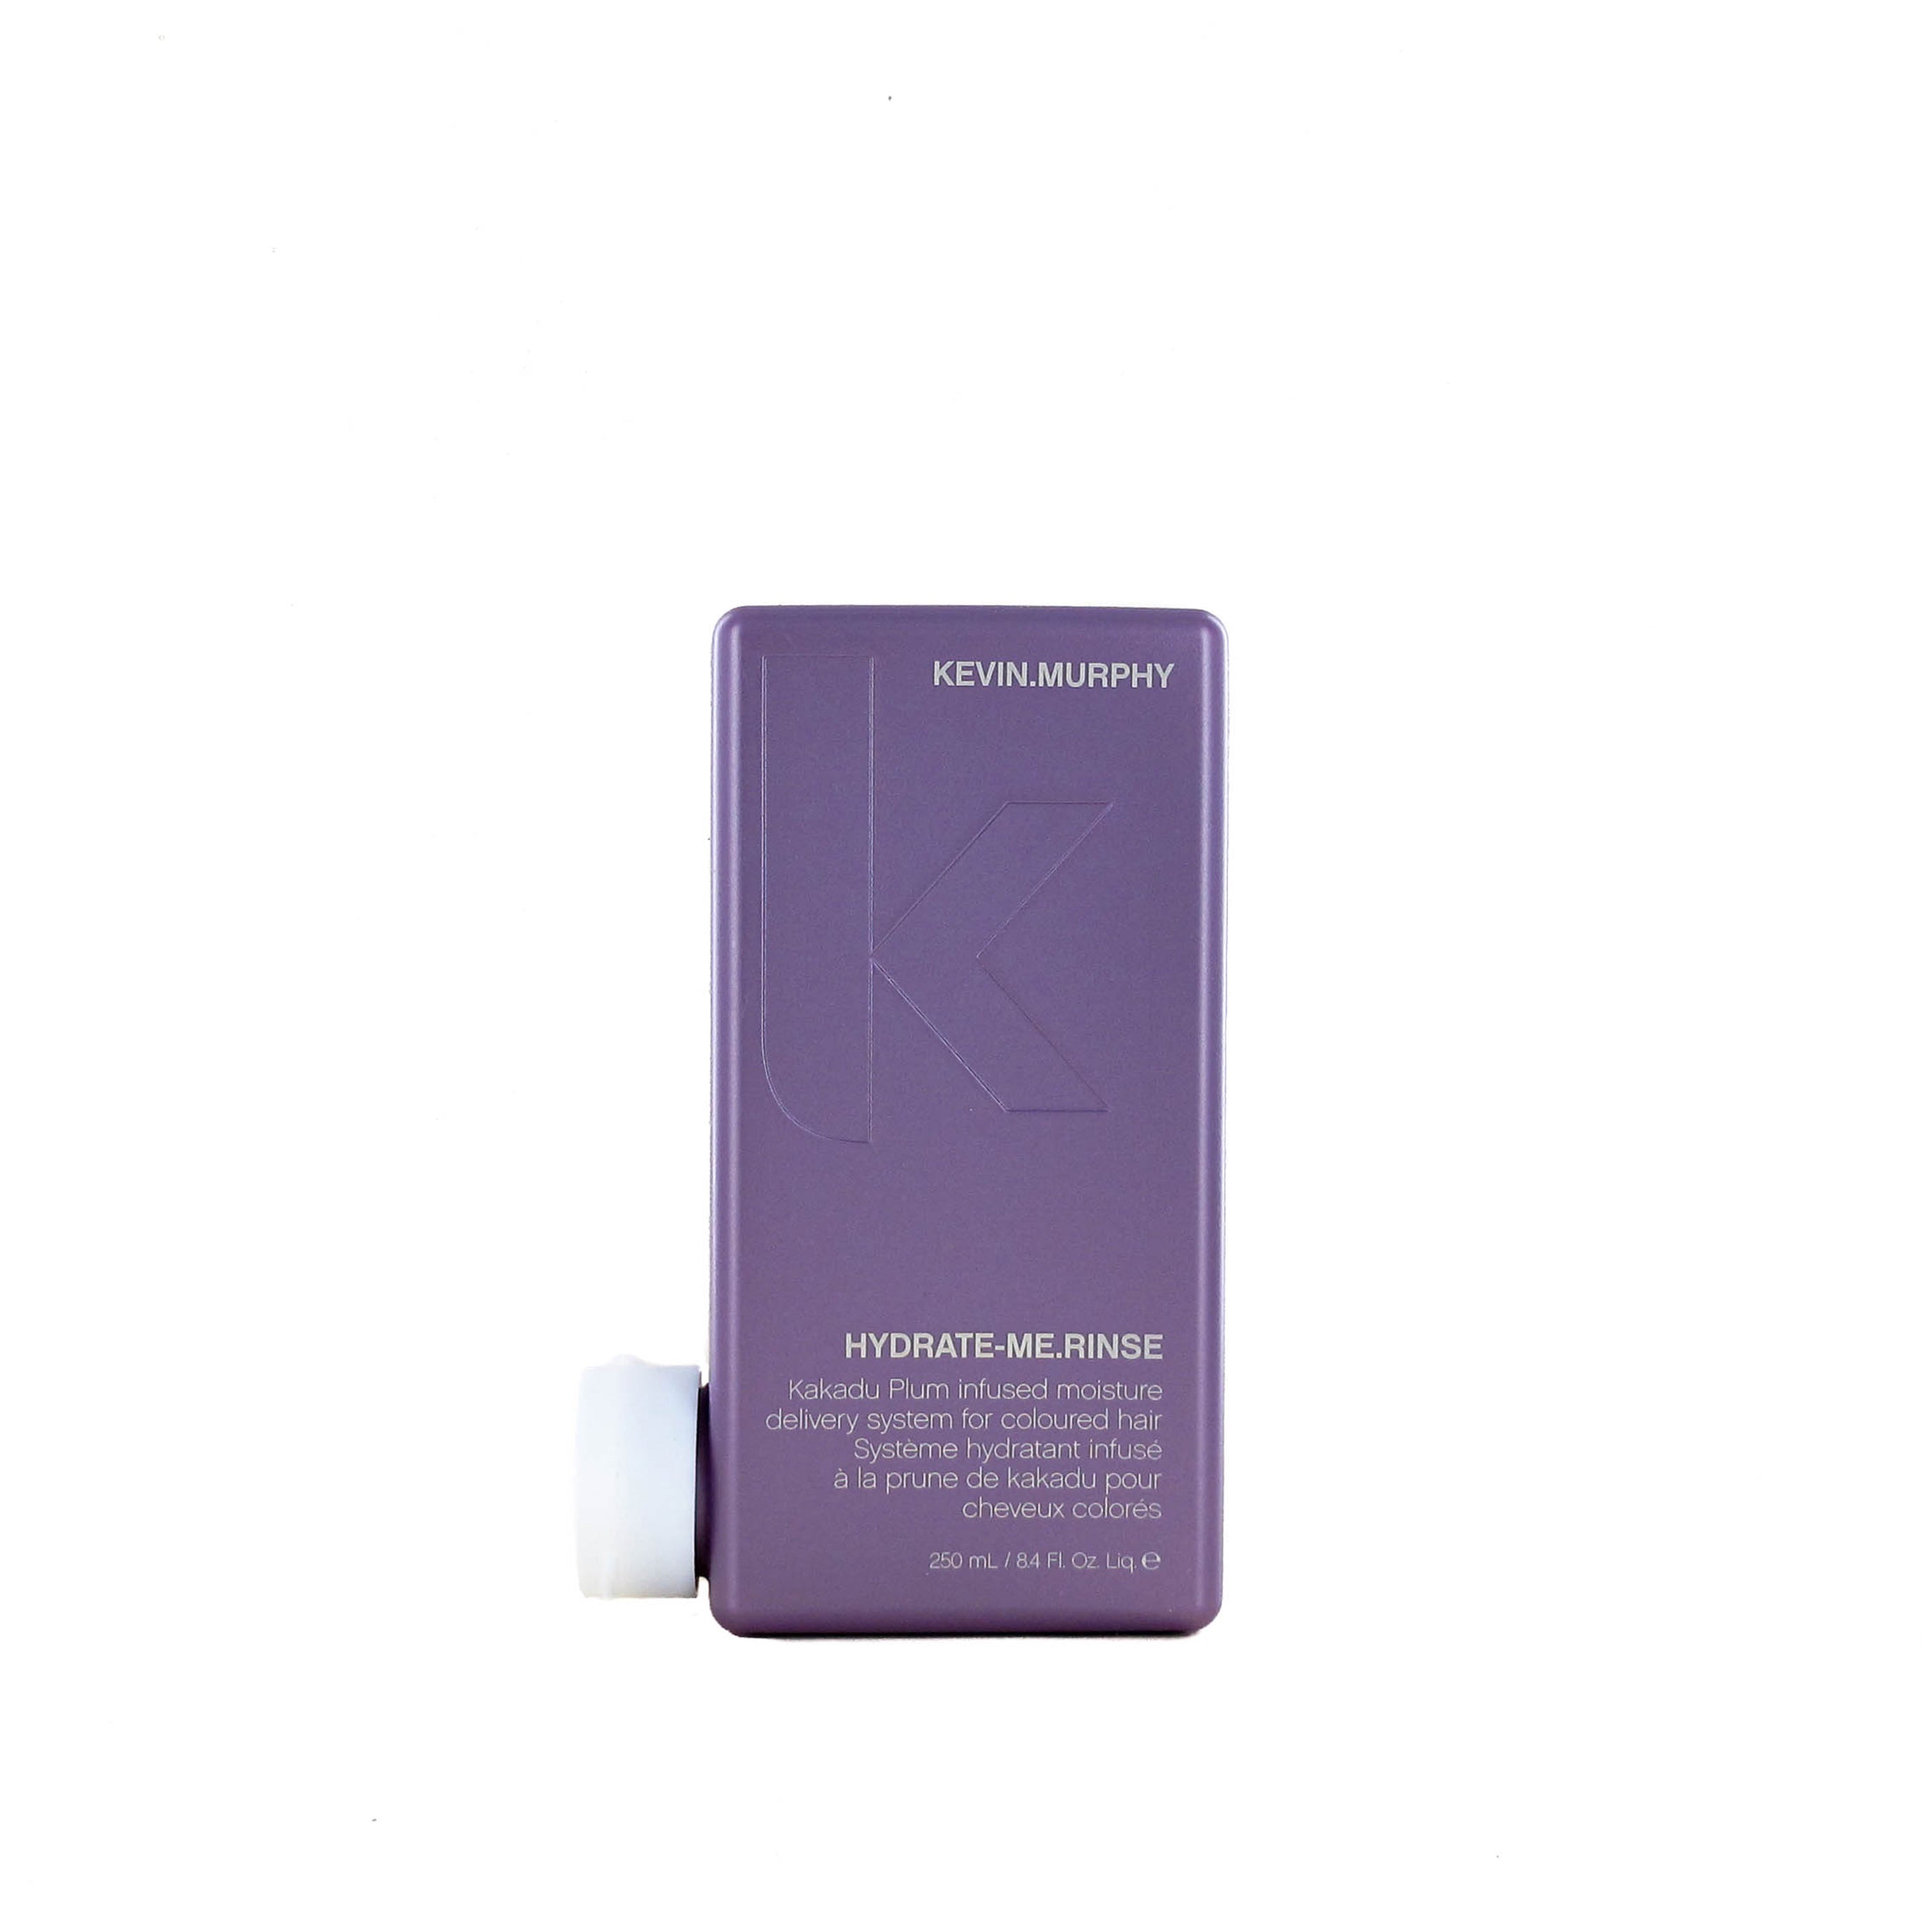 KEVIN MURPHY Hydrate Me Rinse 8.4 oz